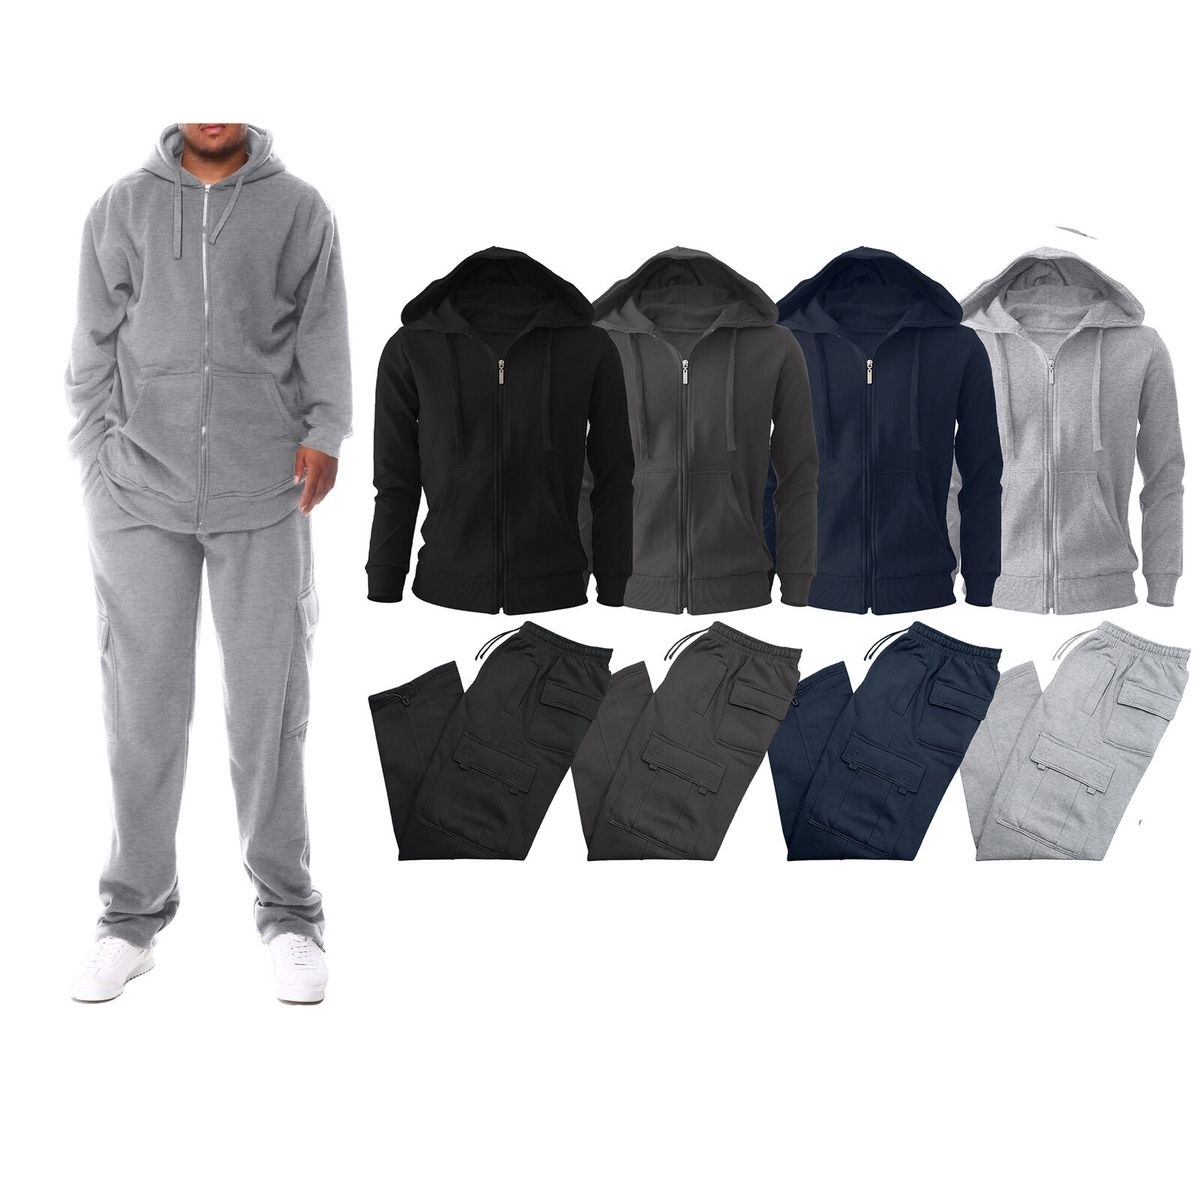 2-Pack: Men's Big & Tall Winter Warm Athletic Active Cozy Fleece Lined Multi-Pocket Full Zip Up Cargo Tracksuit - Grey, Large